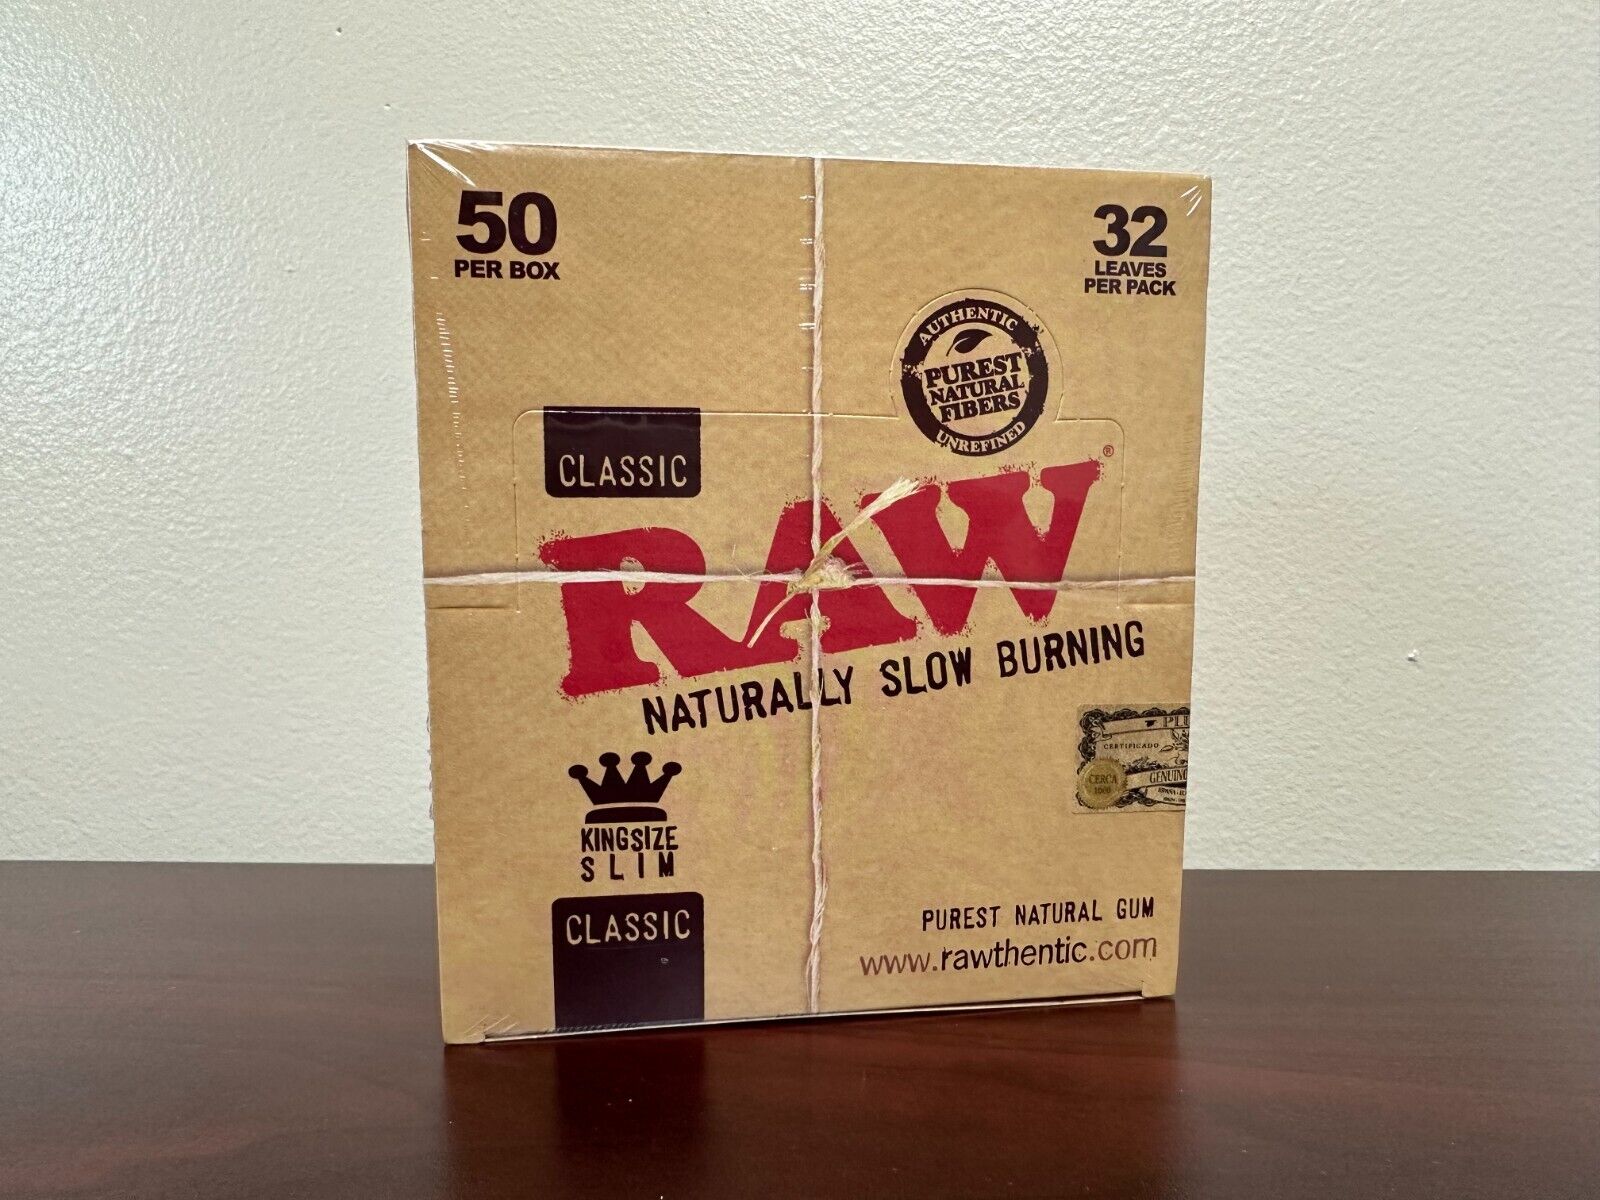 Raw Classic King Size Slim 50 Pack Sealed. Available Now for 29.95